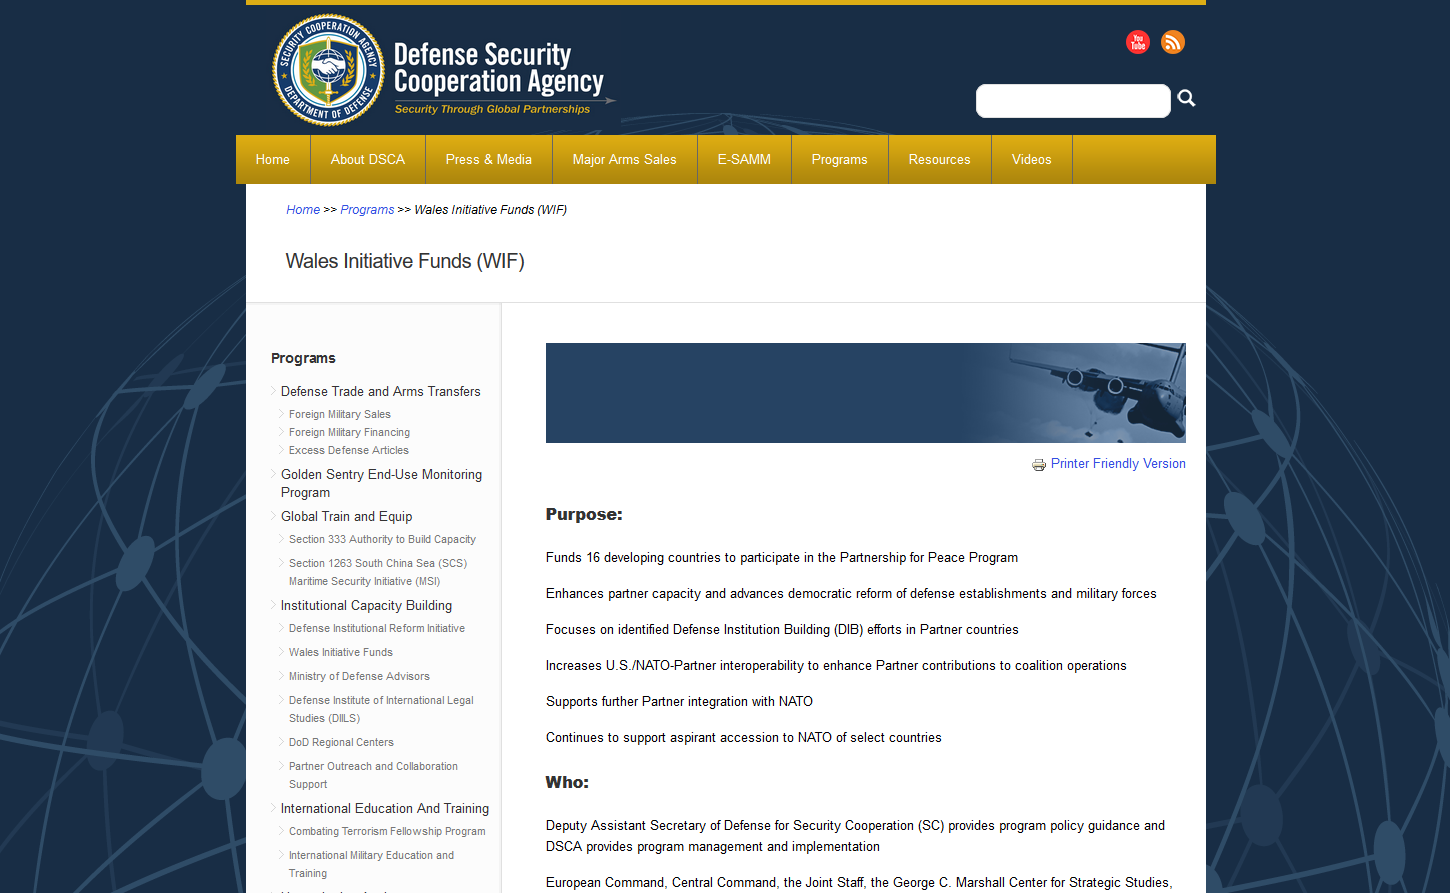 Defence Security Cooperation Agency